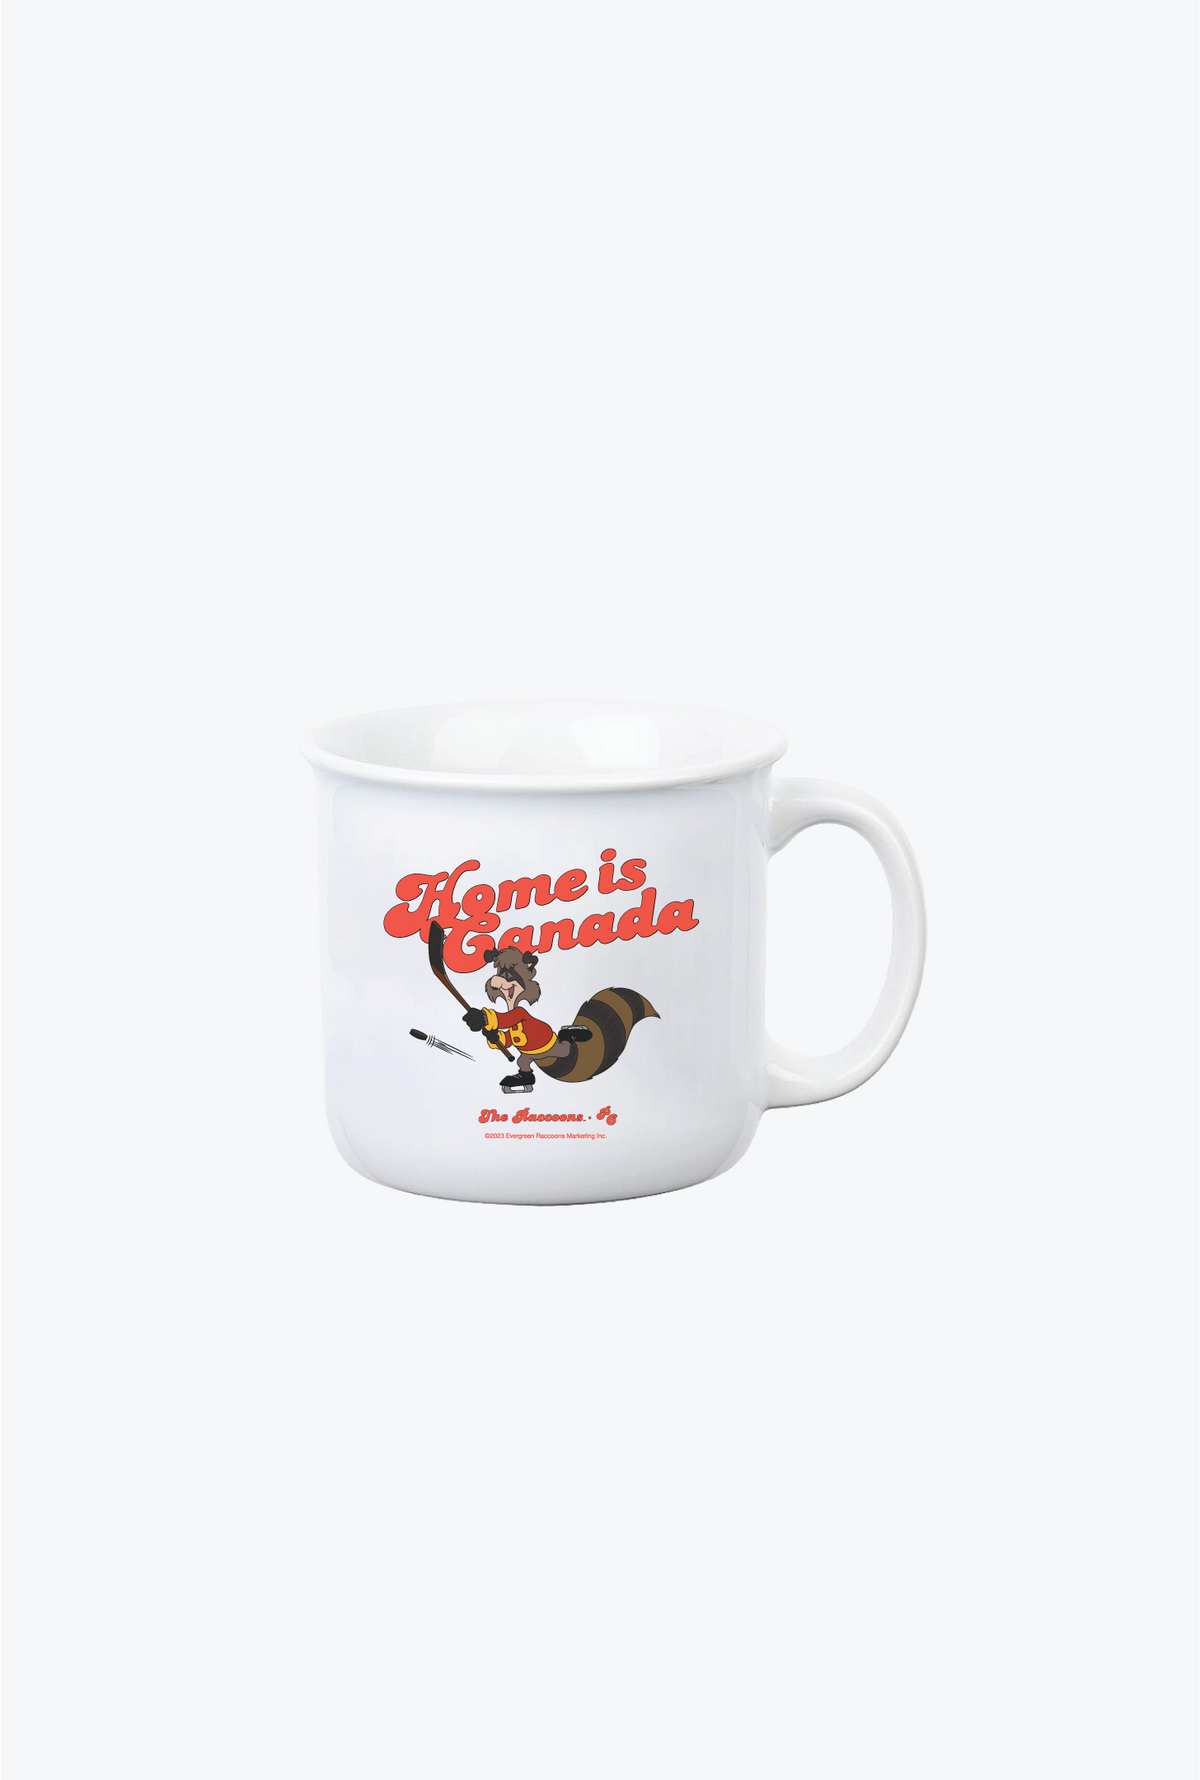 The Raccoons Home is Canada Campfire Mug - White